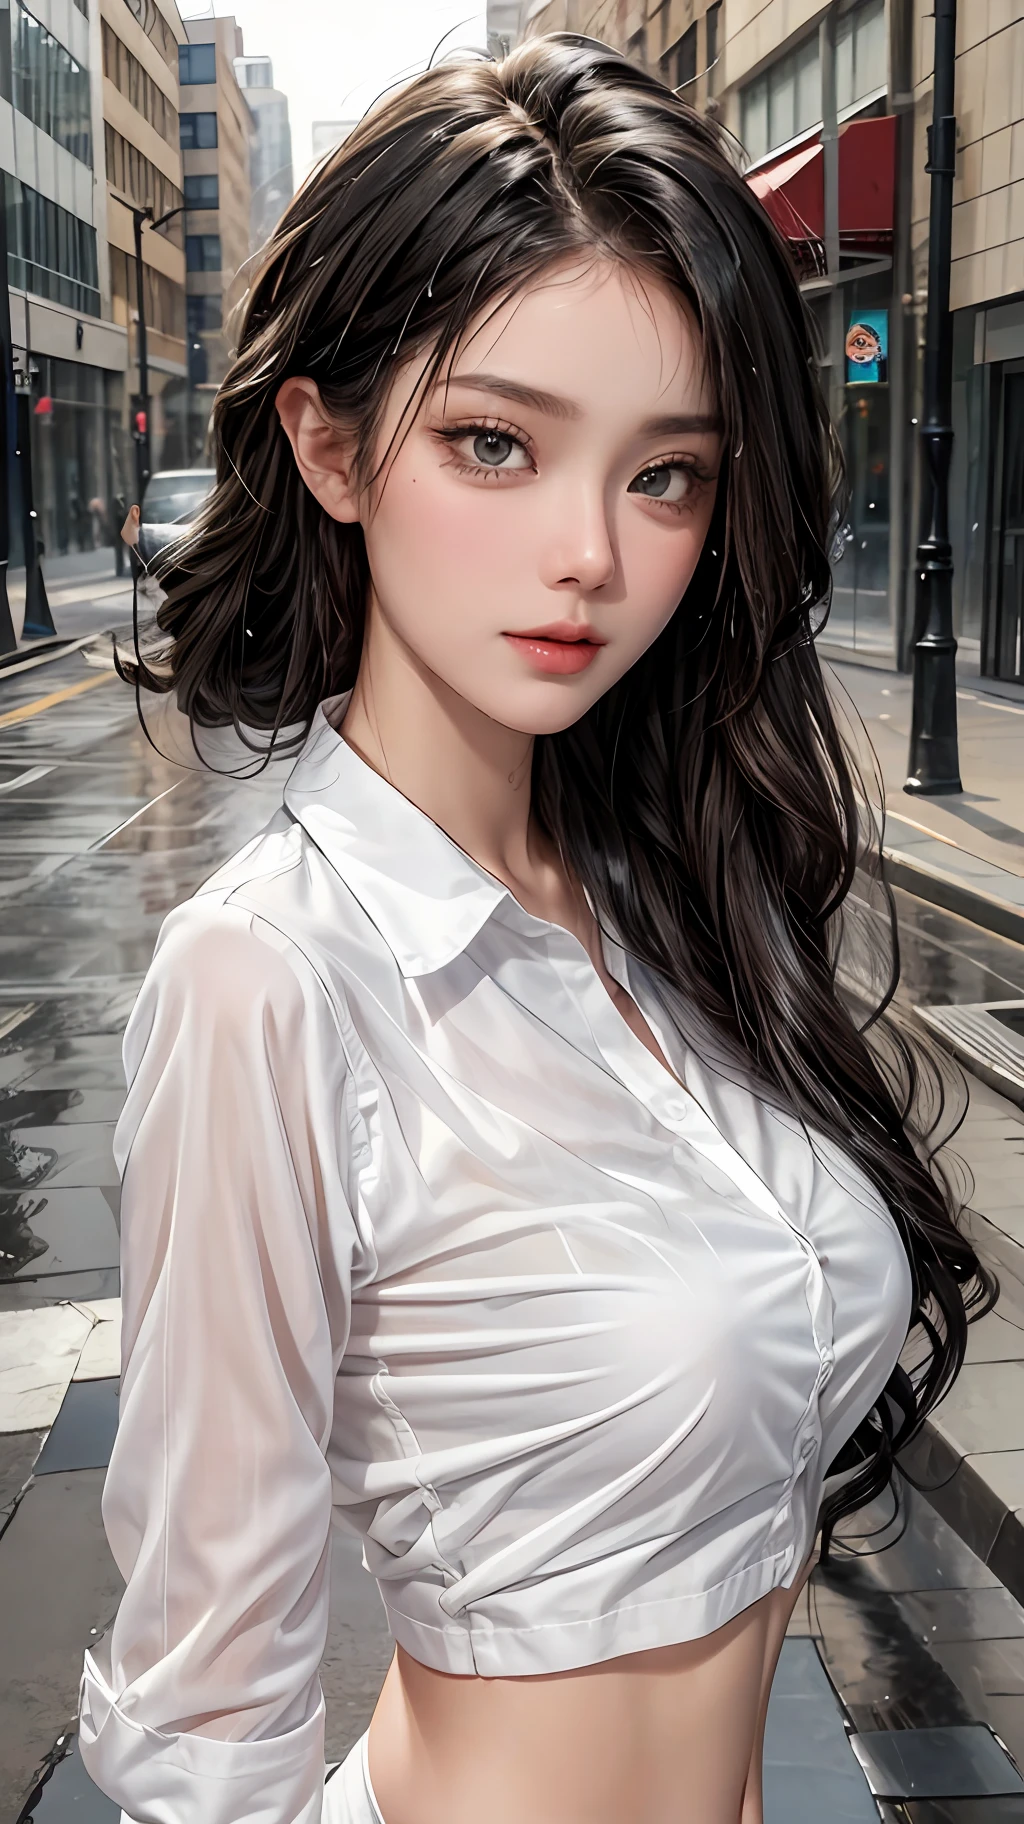 ((Best Quality, 8K, Masterpiece: 1.3)), Sharp: 1.2, Perfect Body Beauty: 1.4, Slim Abs: 1.2, ((Layered Hairstyle, Big Breasts: 1.2)), (Wet White Button Long Shirt: 1.1), (Rain, Street: 1.2), Wet: 1.5, Highly detailed face and skin texture, detailed eyes, double eyelids, side face looking at the camera